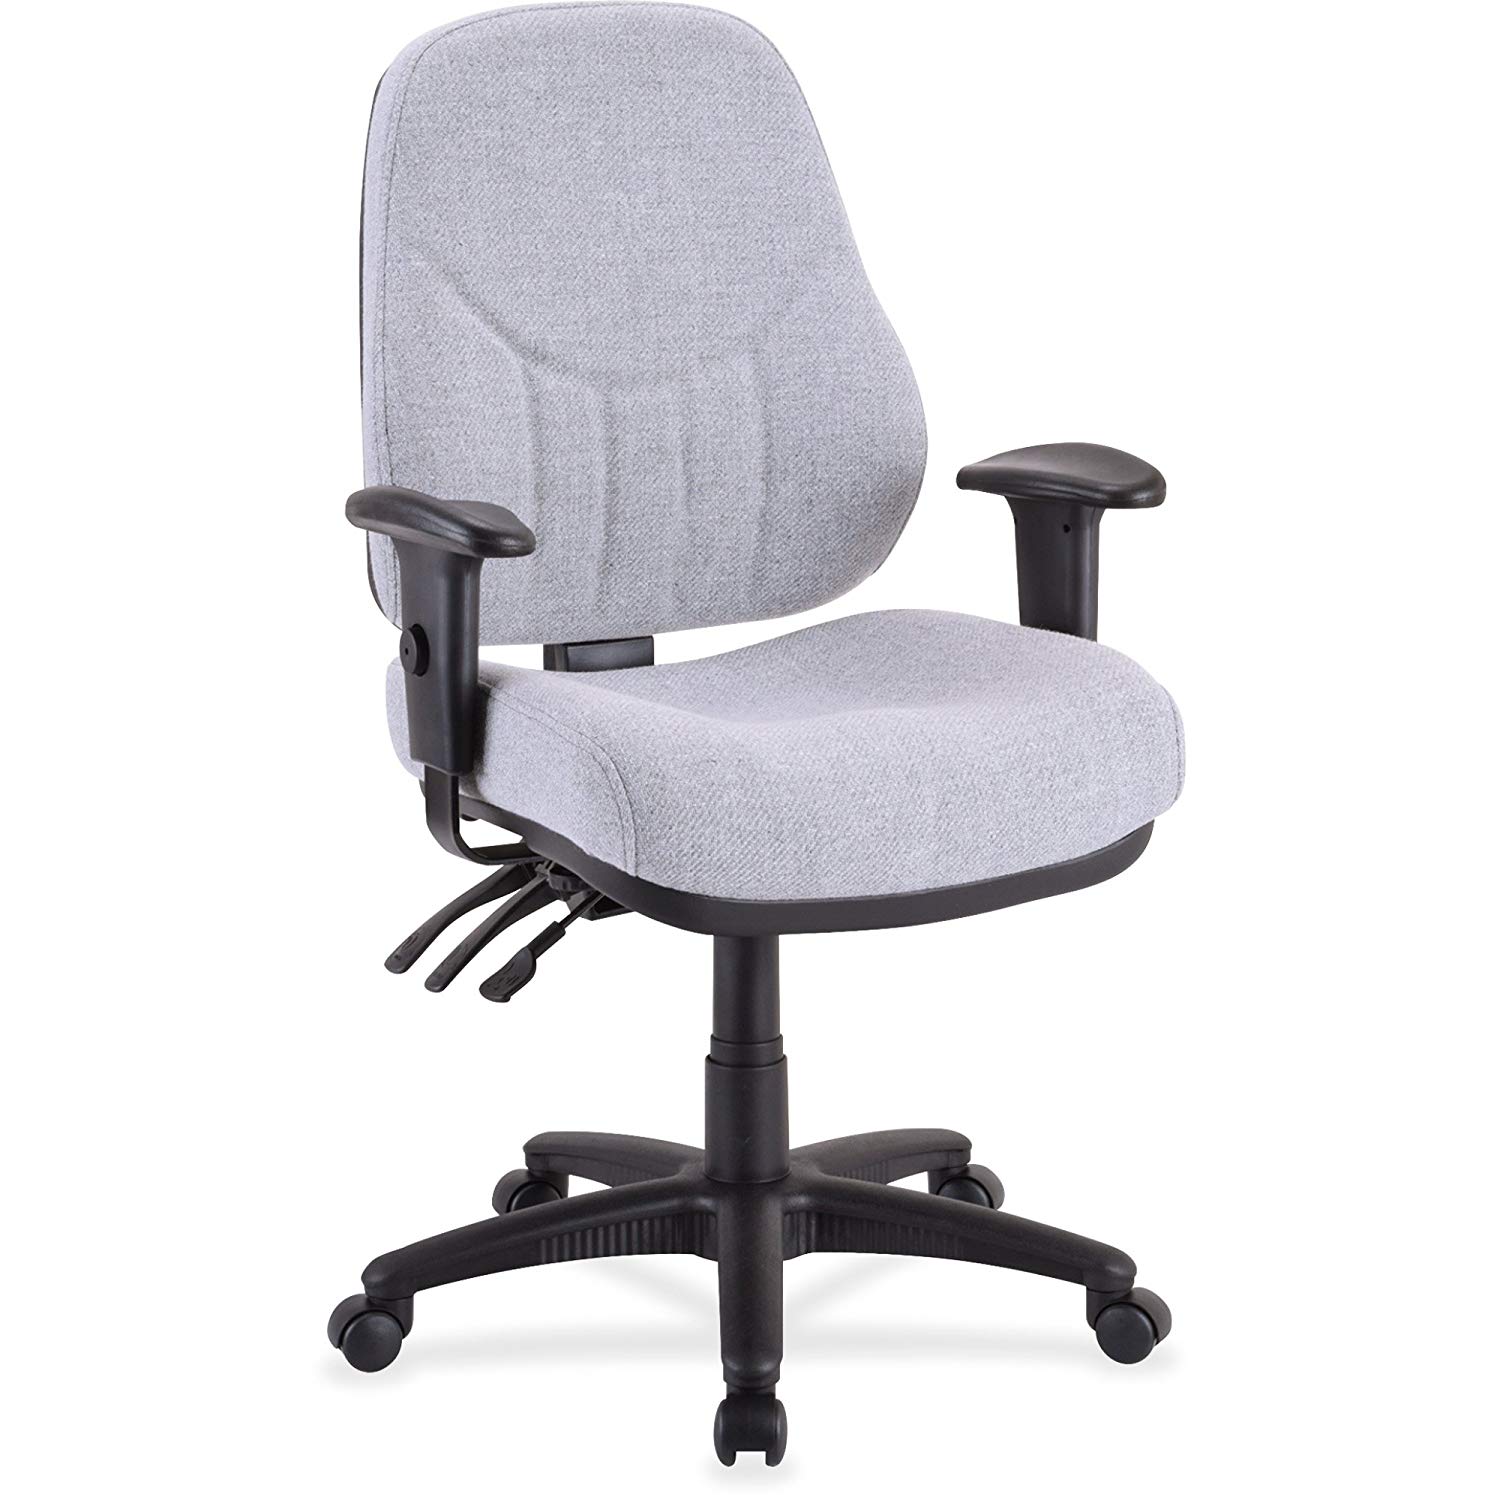 9 Best Chairs for Sewing Reviewed in Detail (Jul. 2021)